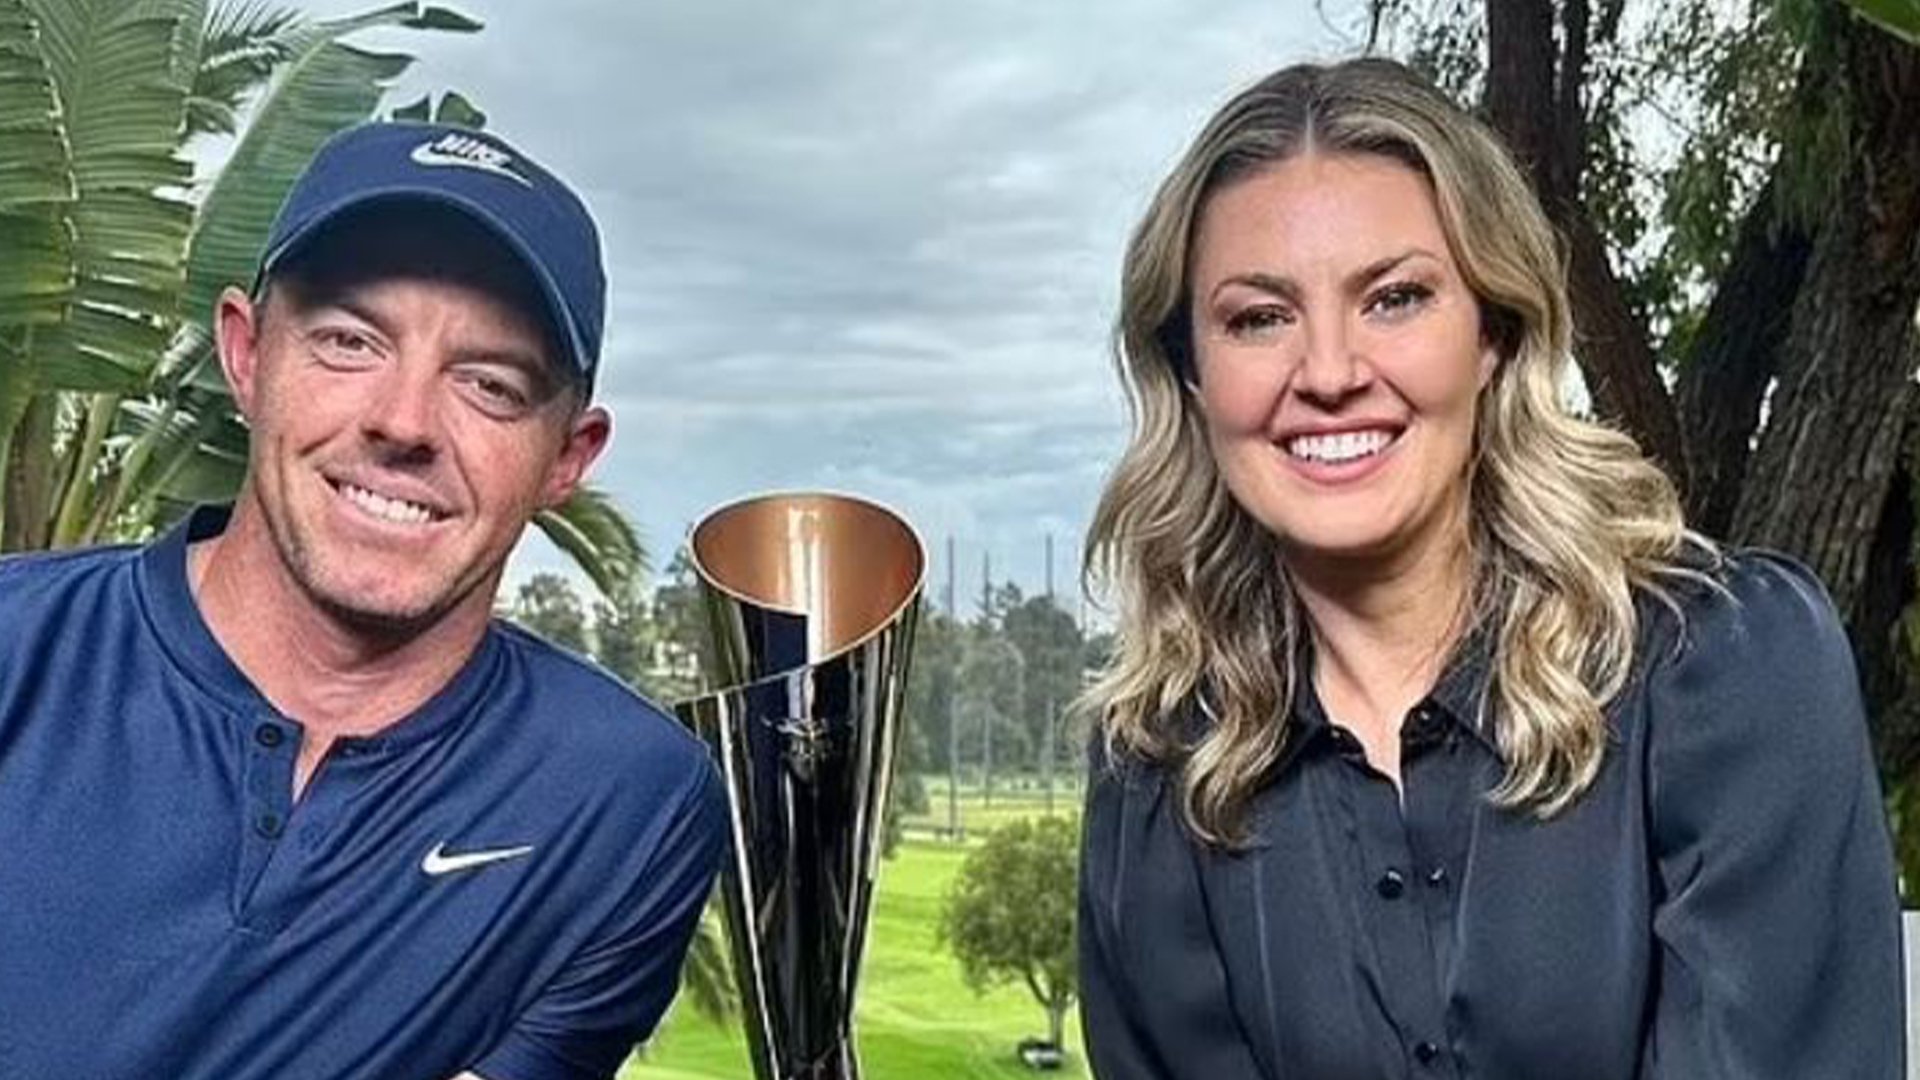 Rory McIlroy and CBS Sports journalist Amanda Balionis spark romance rumours with flirty TV interview